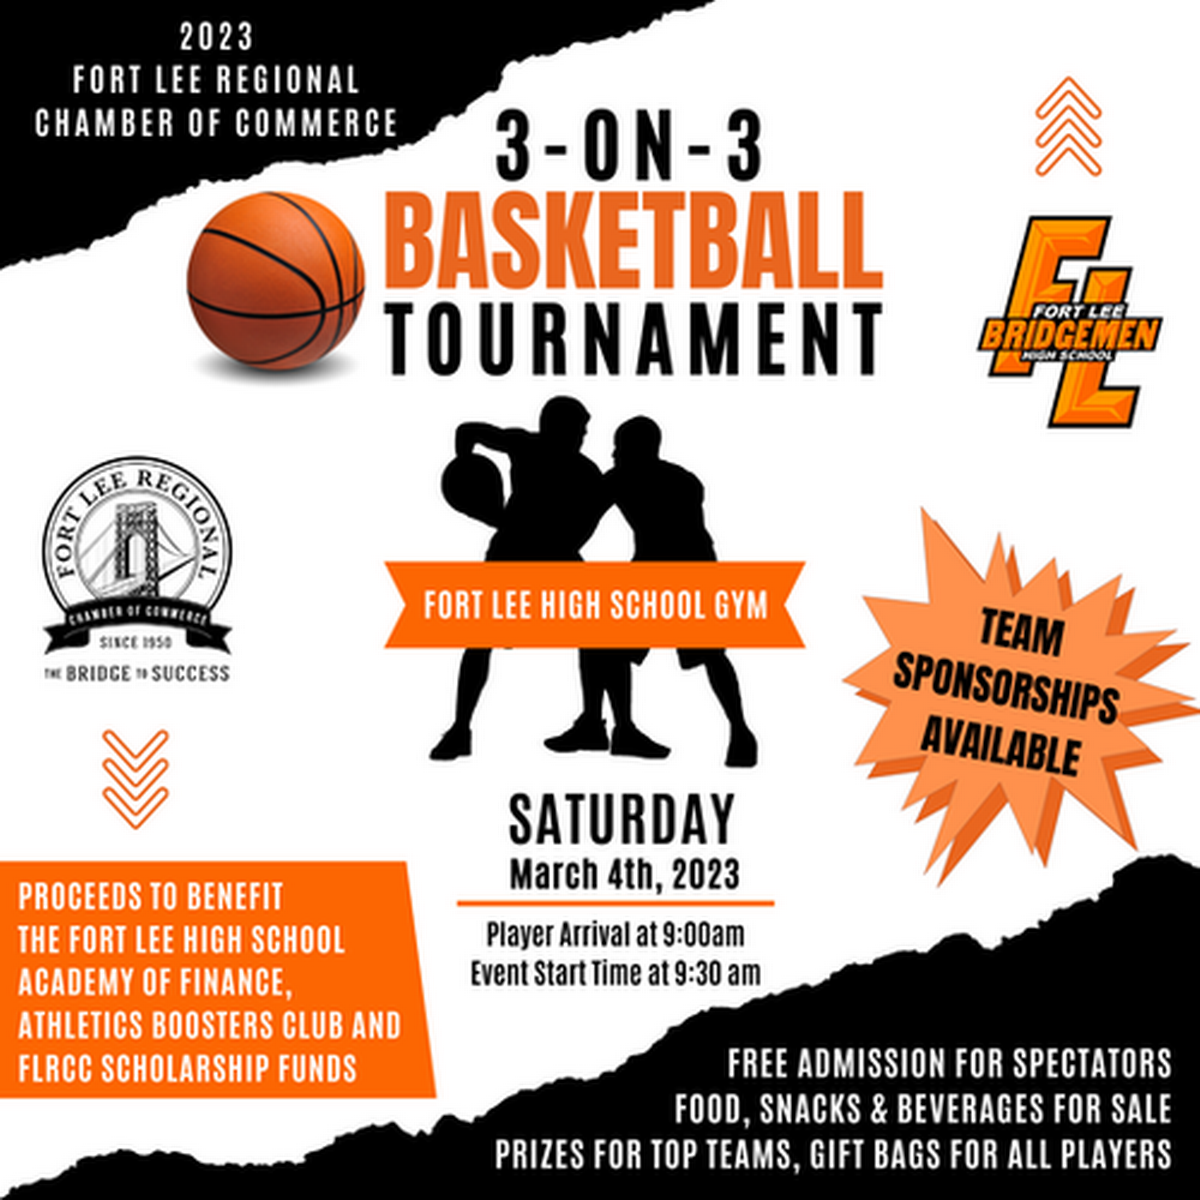 12th Annual 3-on-3 Basketball Tournament (3/4/23) - Mar 4, 2023 - Fort Lee  Regional Chamber of Commerce, NJ